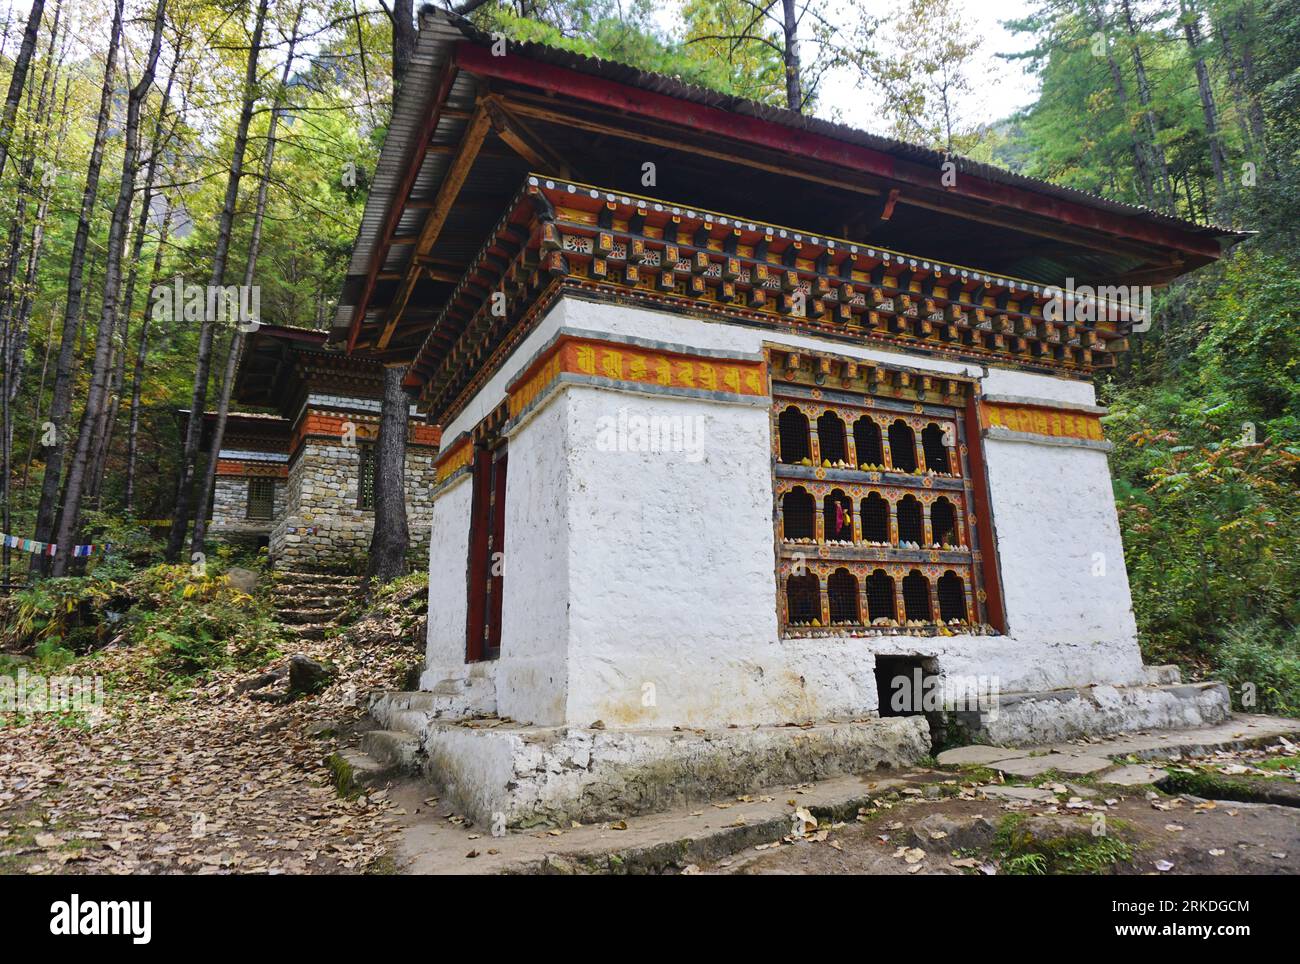 Three traditional stone buildings with typical Bhutanese painted woodwork house huge prayer wheels turned by water from a cascading mountain spring Stock Photo